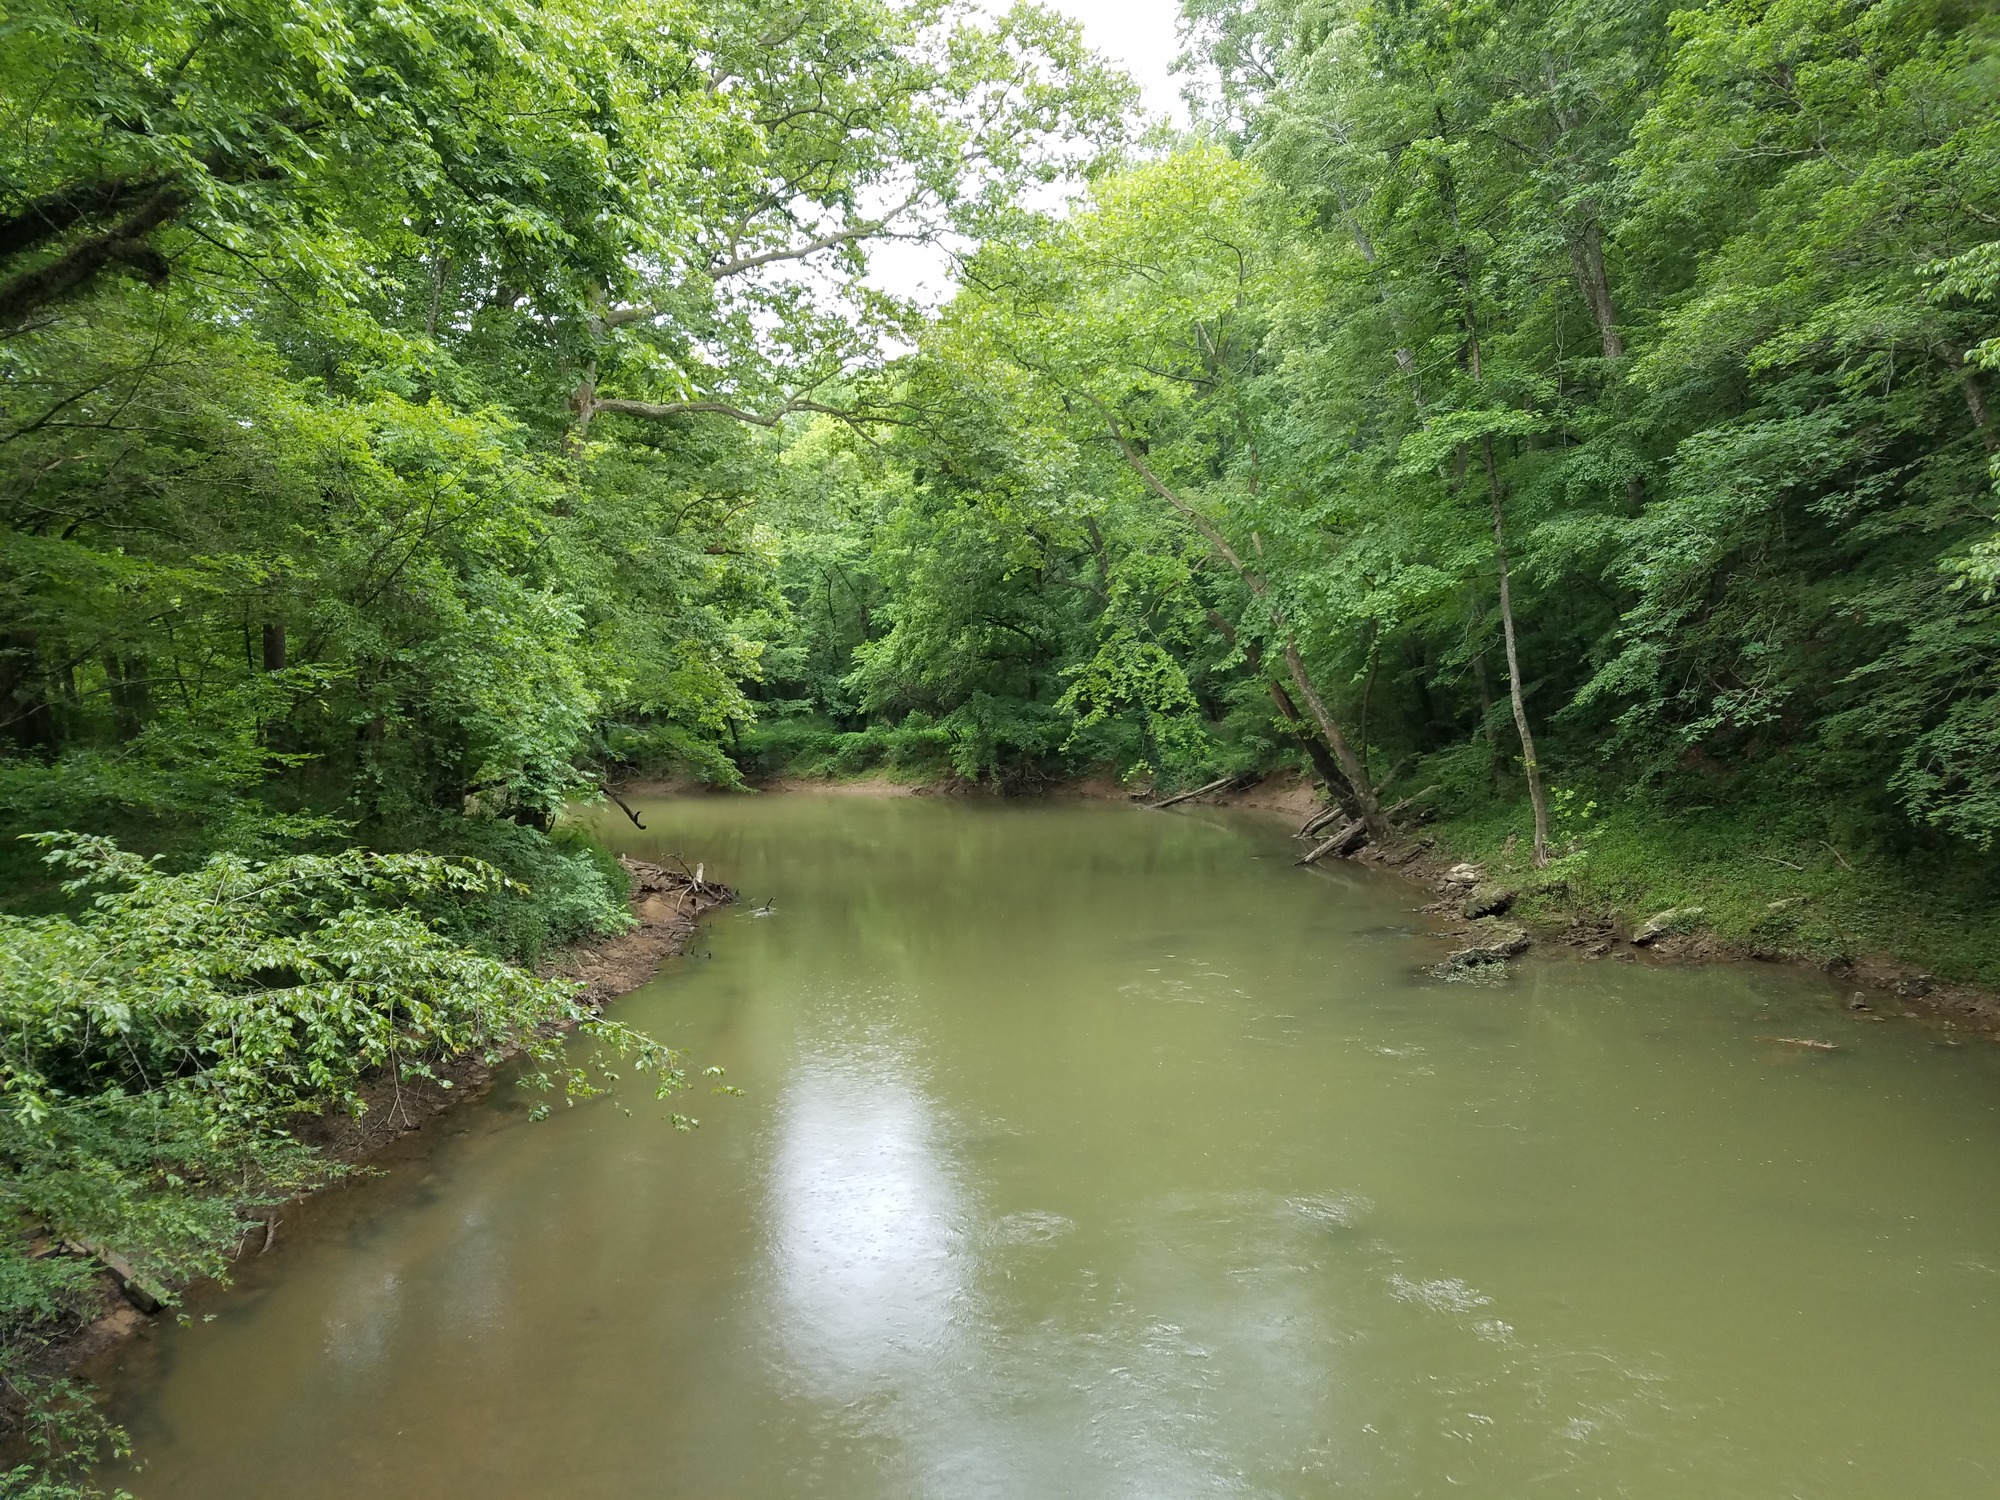 A view of South Chickamauga Creek from the Facilities Bridge at Audubon Acres in Chattanooga, Tennessee